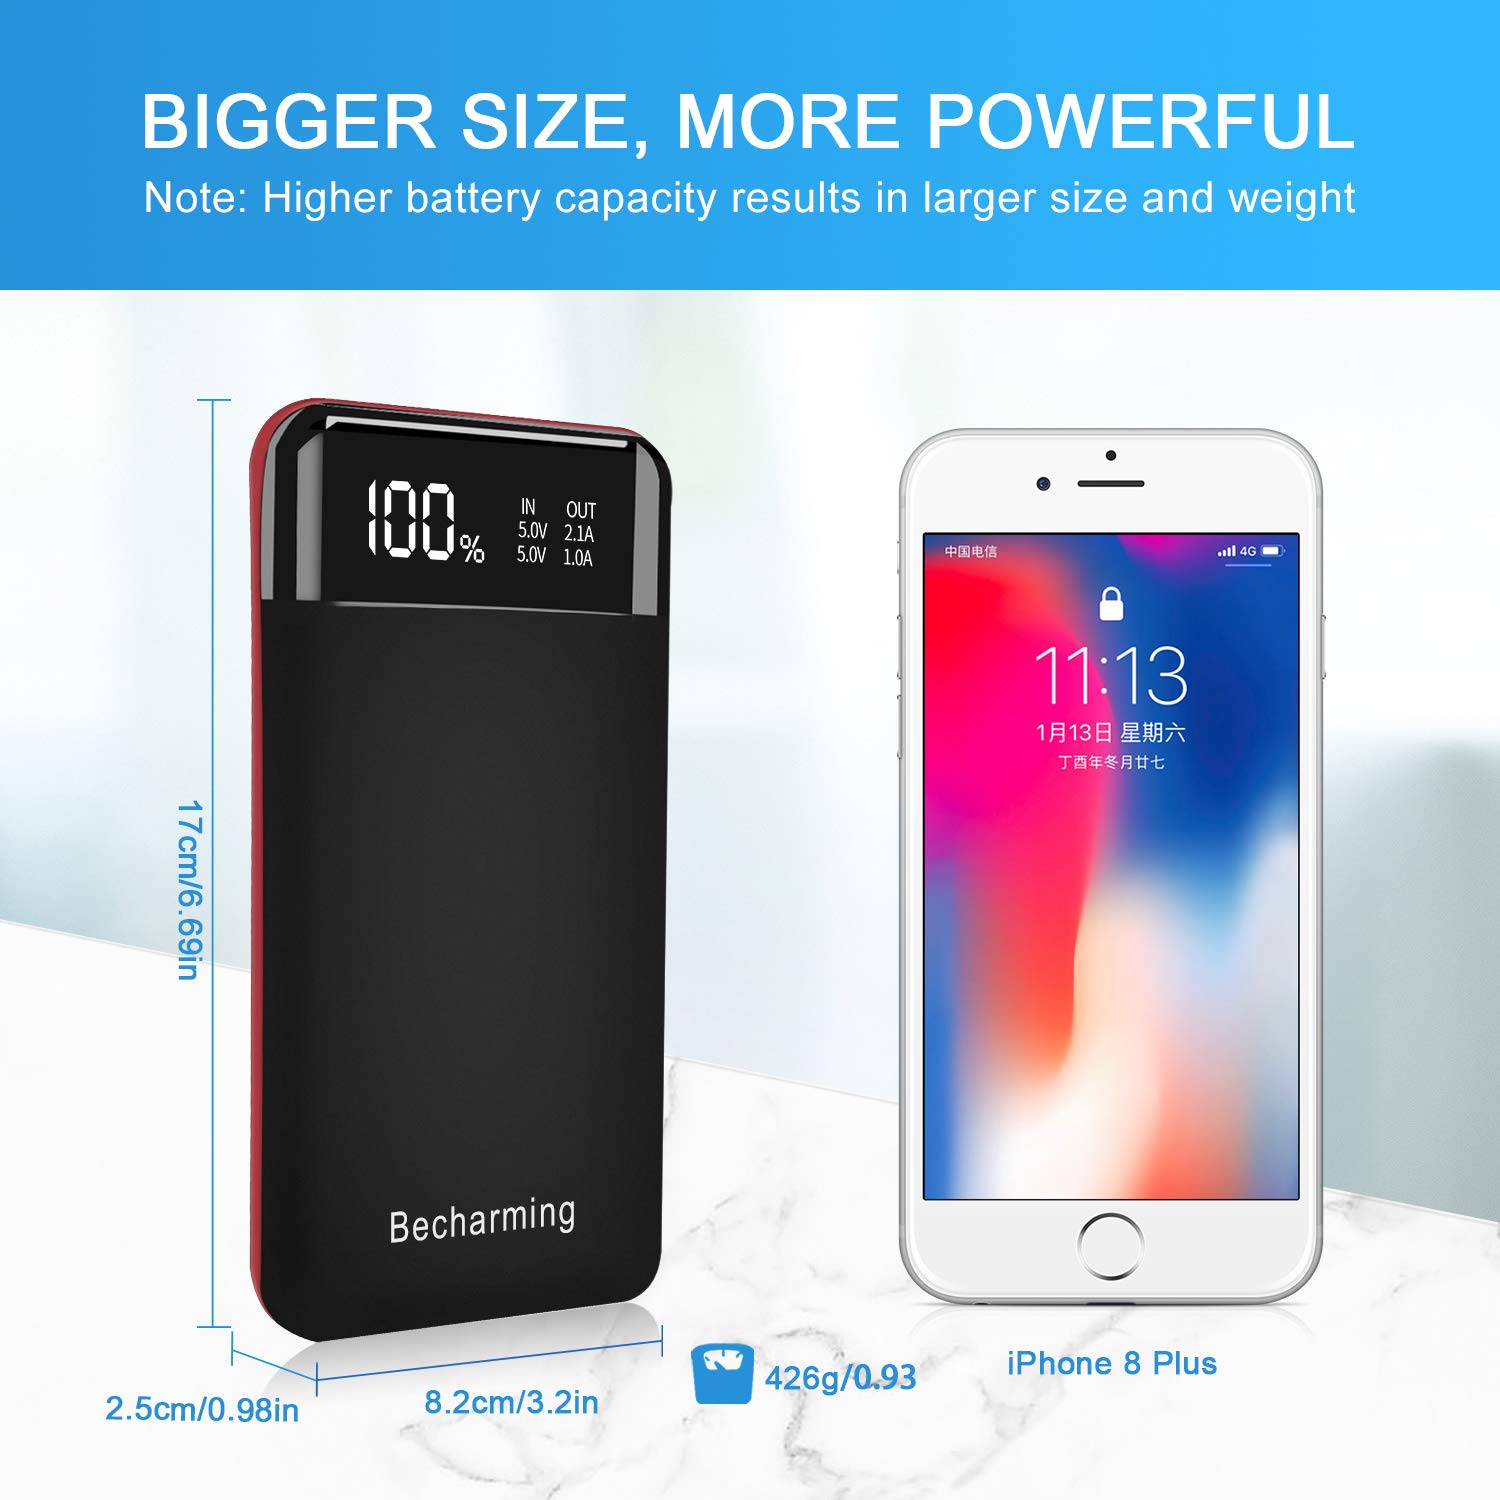 Power Bank 25000mAh Huge Capacity BCM Portable Charger Battery Pack Backup Battery Power Pack Dual Inputs 3 Output Ports with Intelligent LCD Compatible Smartphone, Tablet and More